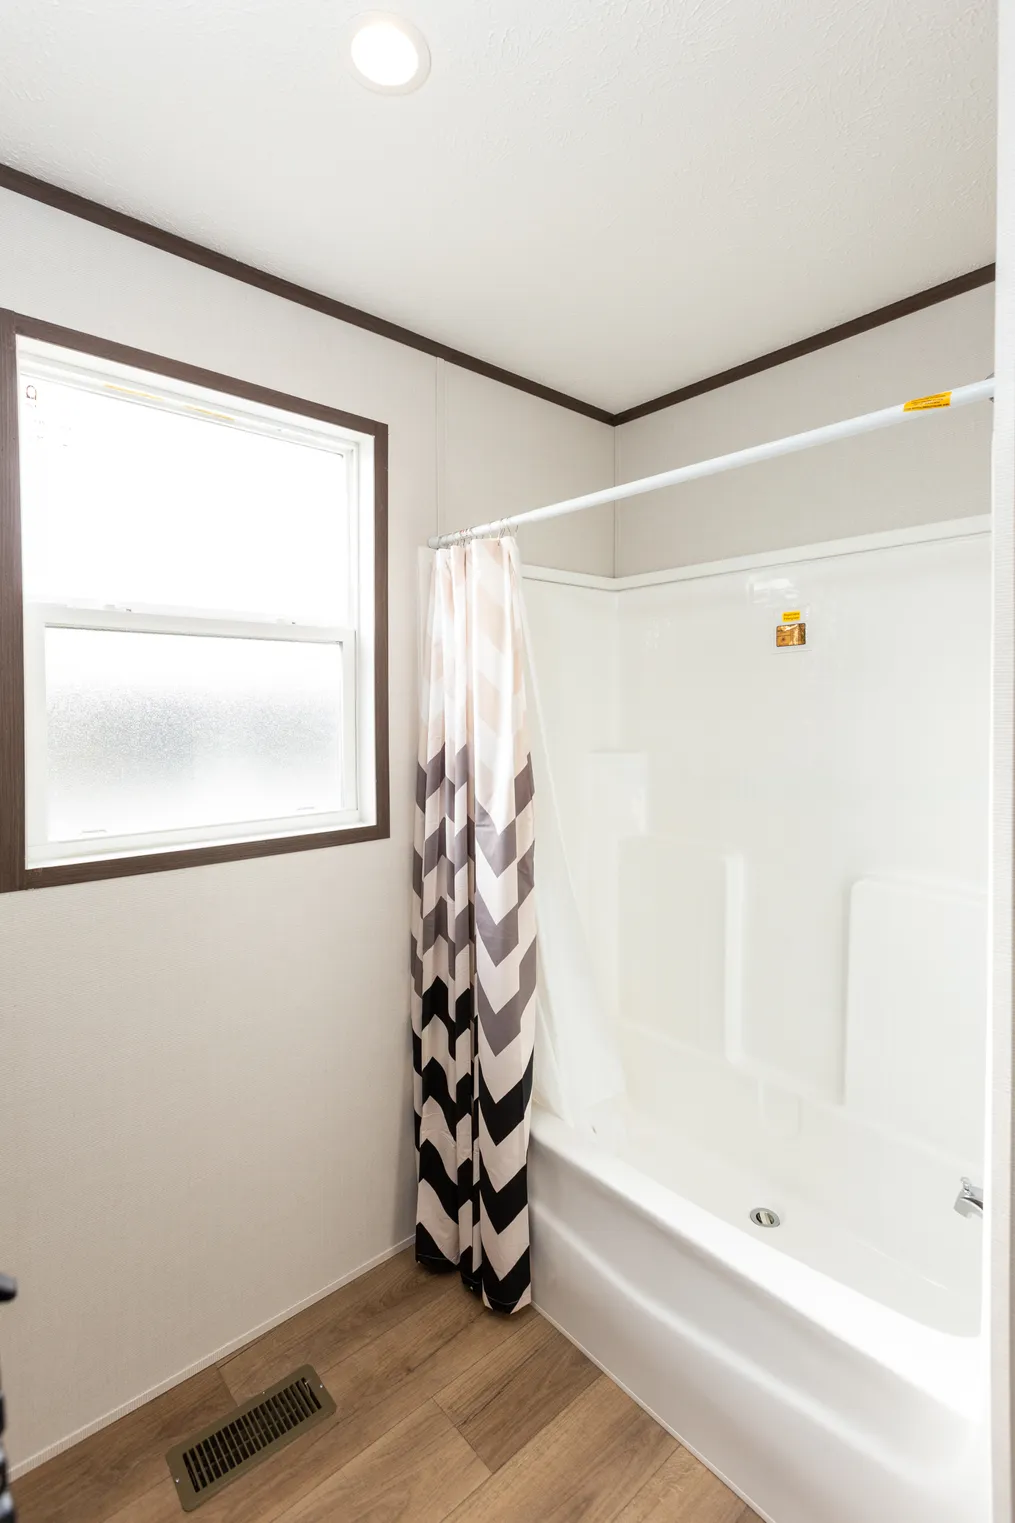 The THE HAMPTON BAY Guest Bathroom. This Manufactured Mobile Home features 3 bedrooms and 2 baths.